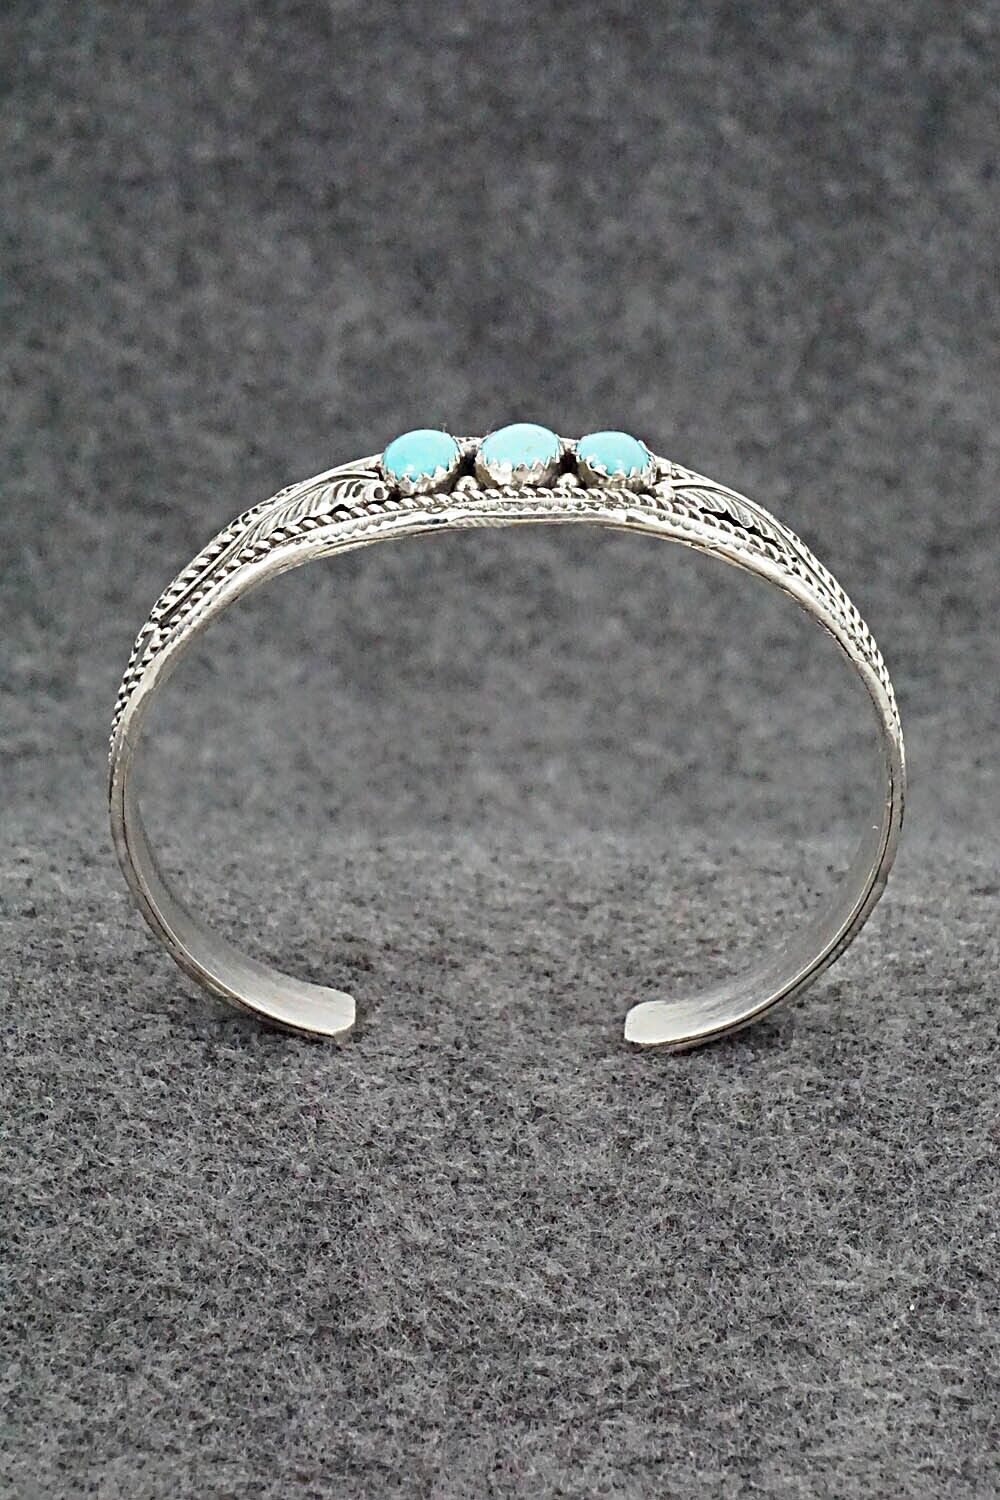 Turquoise & Sterling Silver Bracelet - Betty Begay